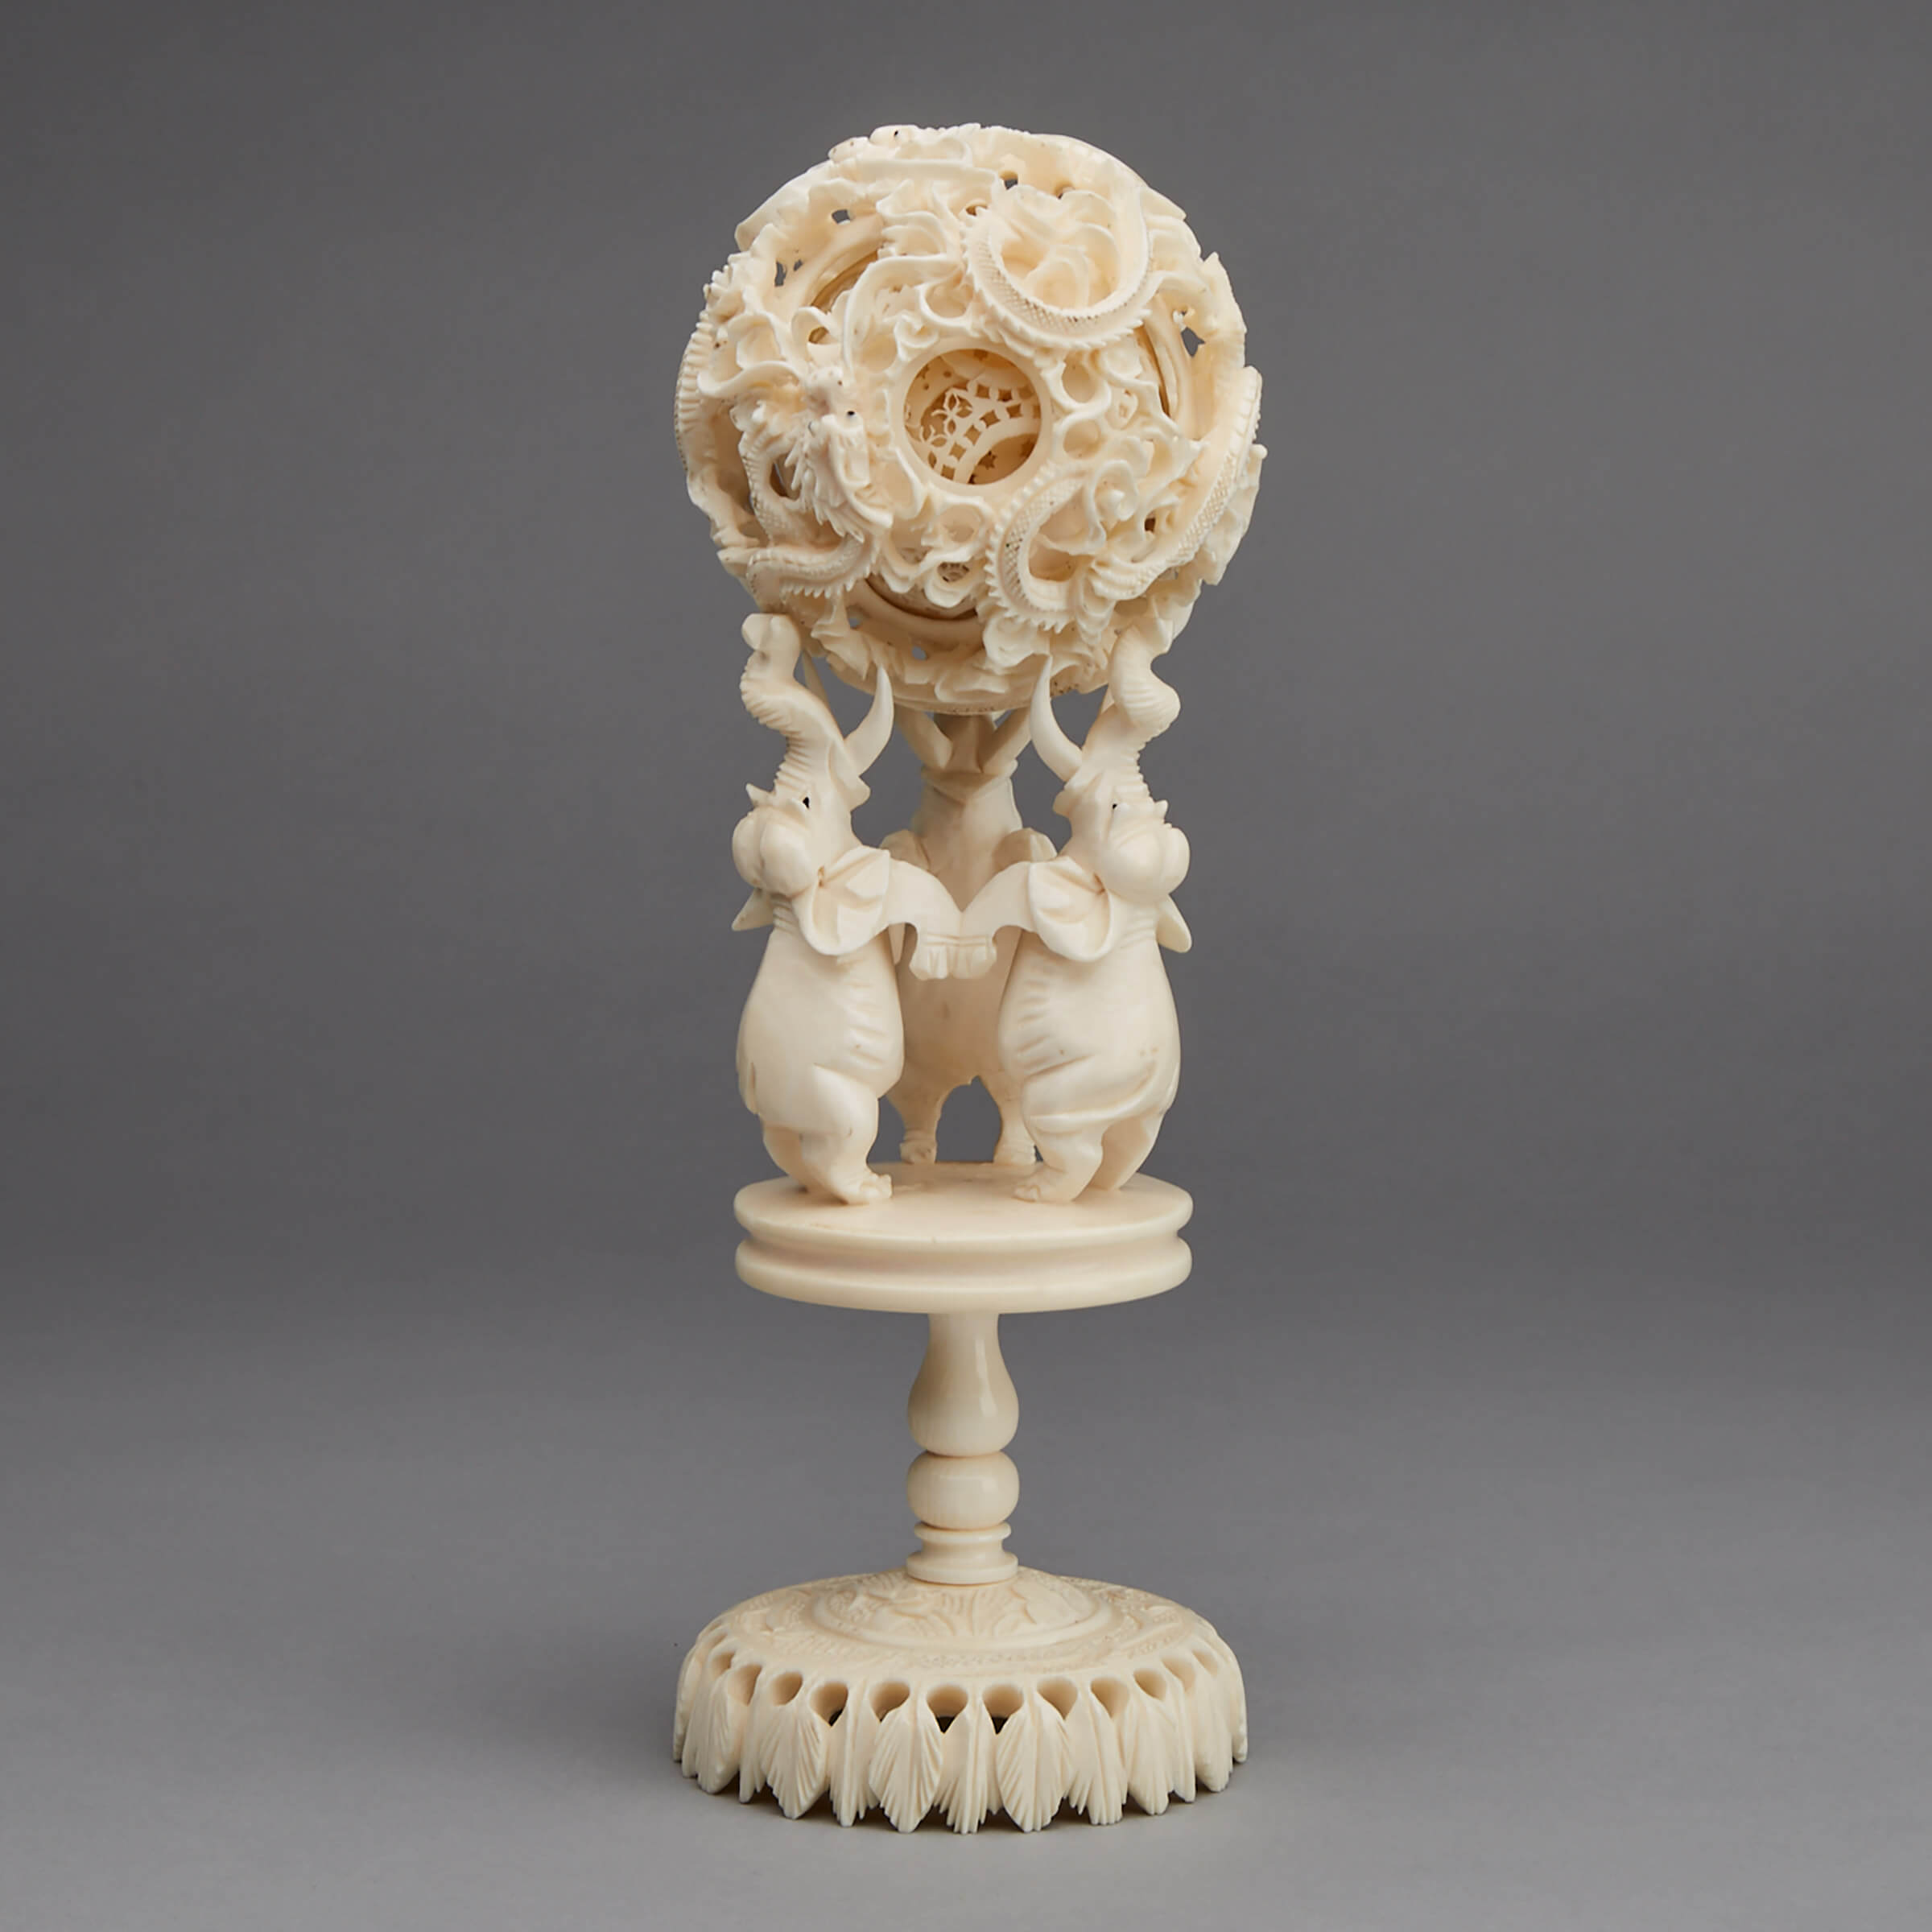 An Ivory Puzzle Ball and Elephant Stand